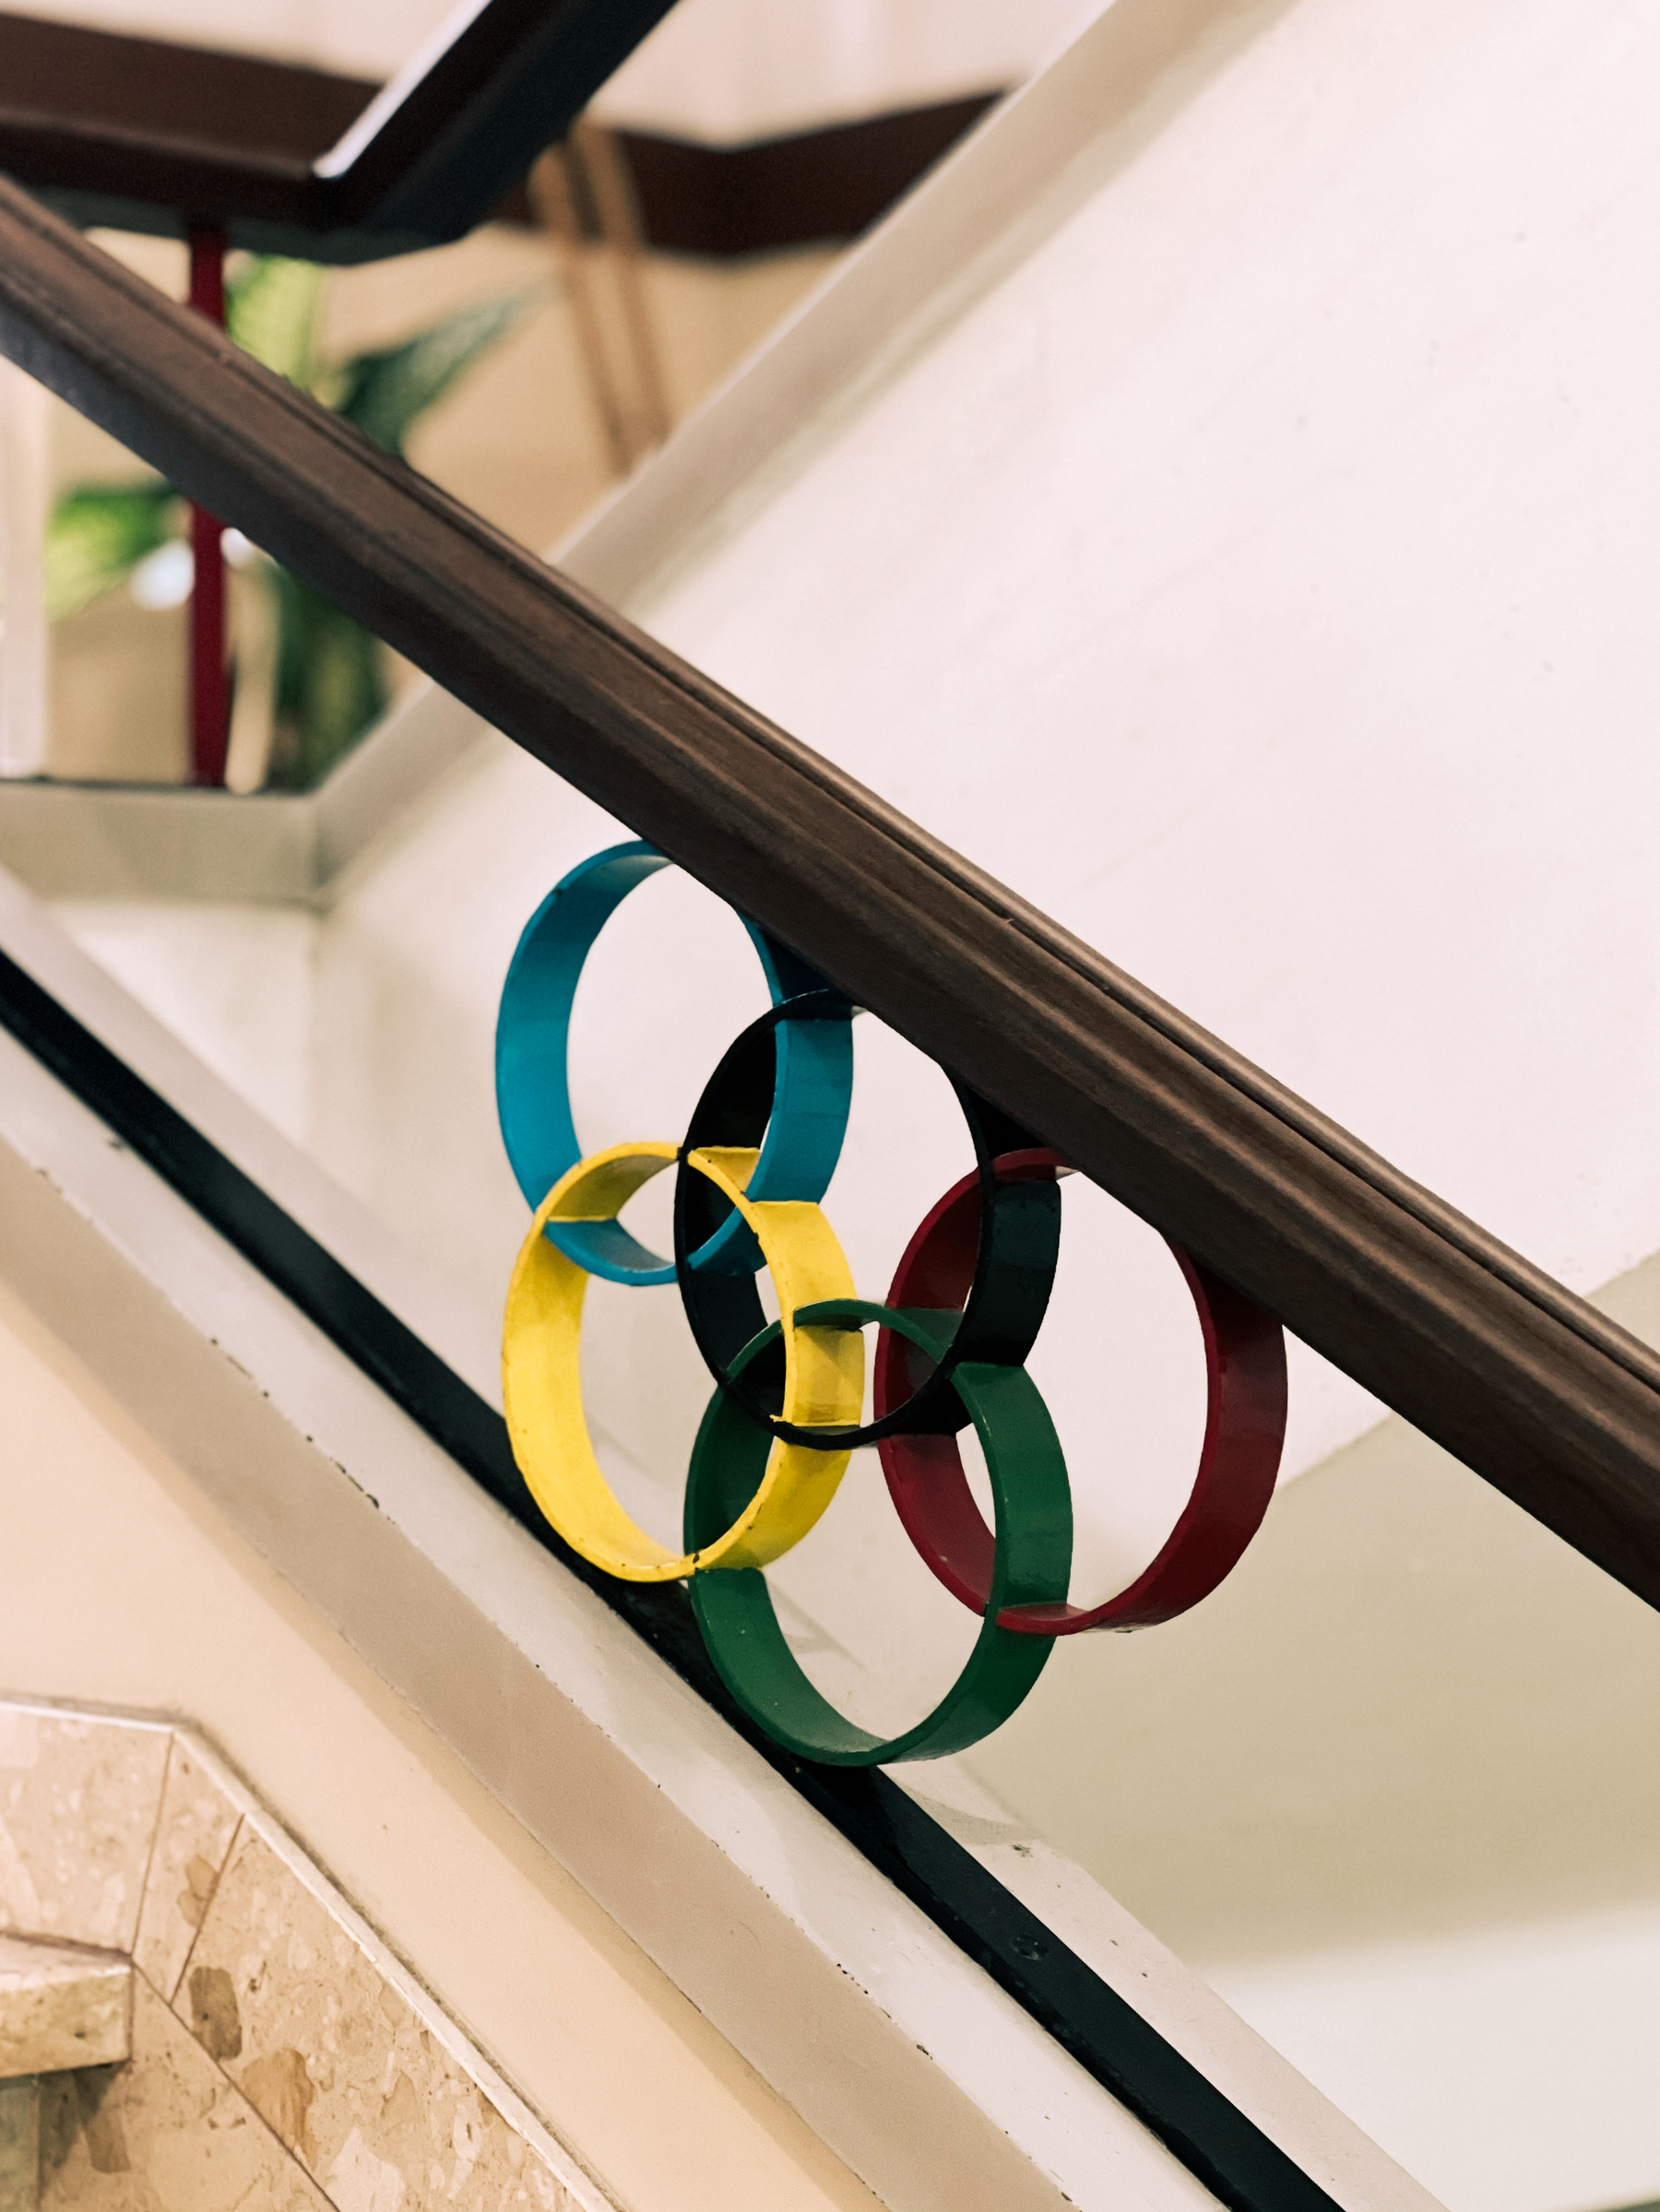 Five interlocking rings in blue, yellow, black, green, and red, representing the Olympic rings, are mounted on a stairway railing with a staircase in the background.